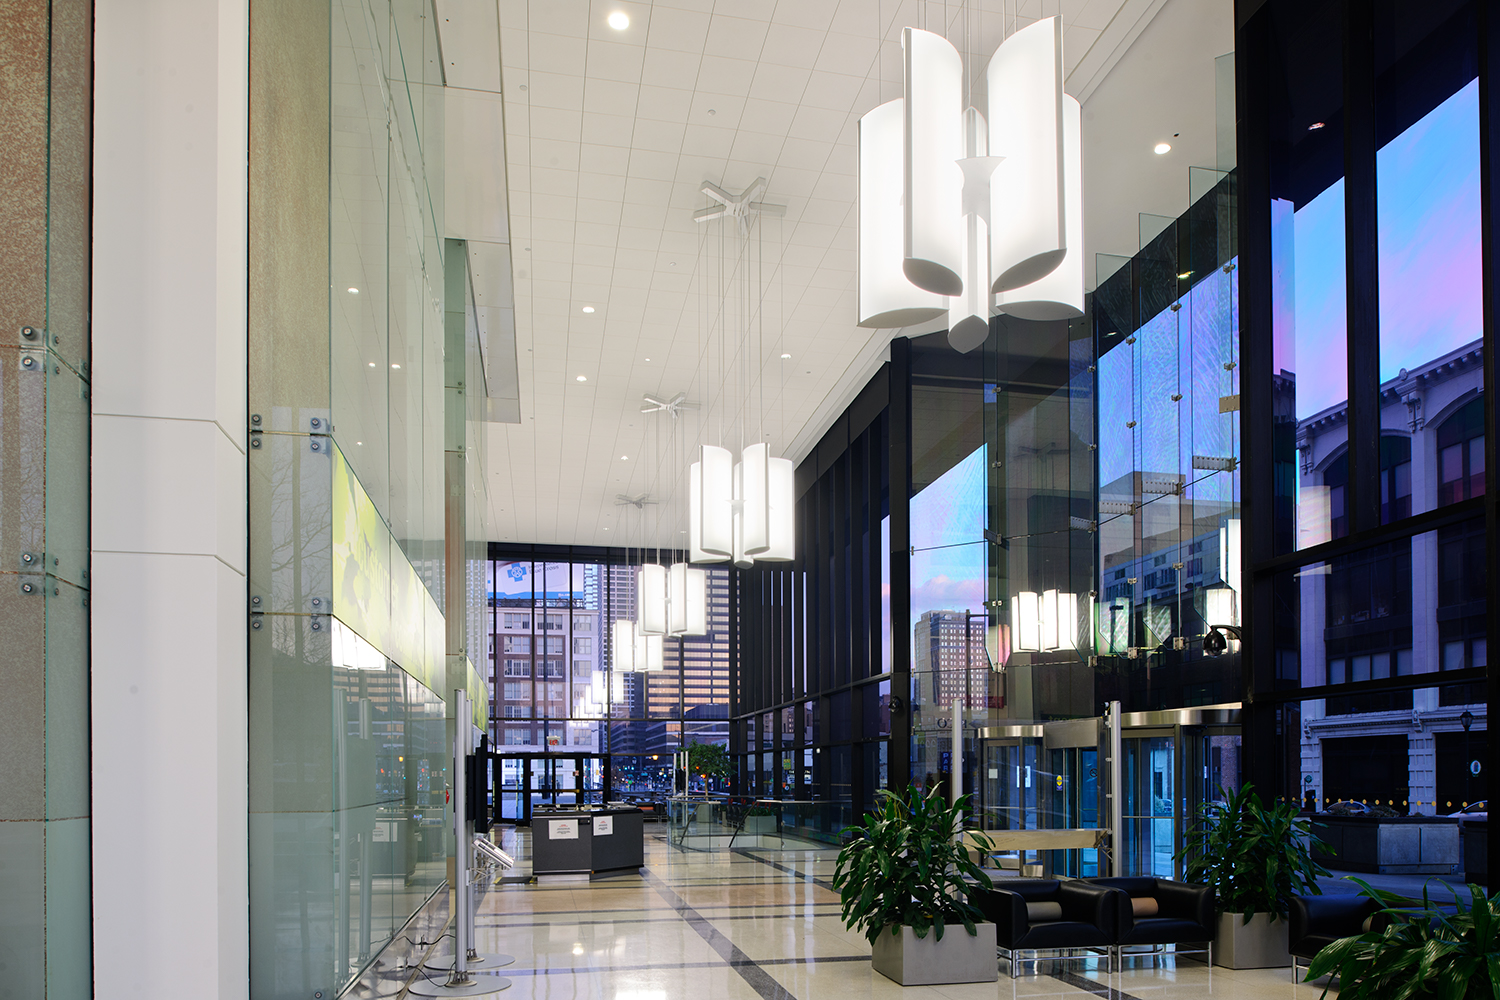 Air Foil pendants configured in multiple star-shaped clusters for stylish lobby lighting that reflects in the glass windows.